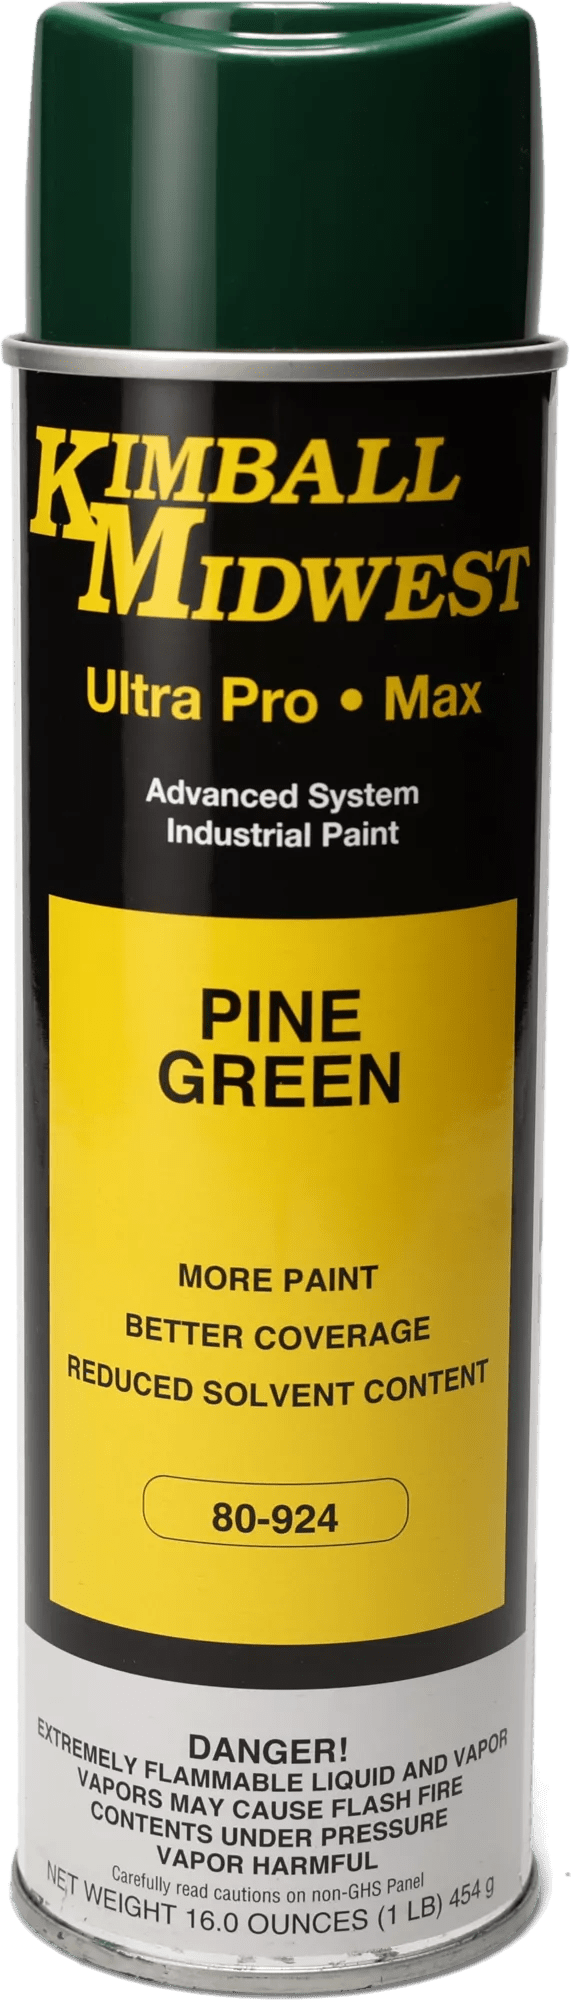 Pine Green Ultra Pro•Max Oil-Based Enamel Spray Paint - 20 oz. Can